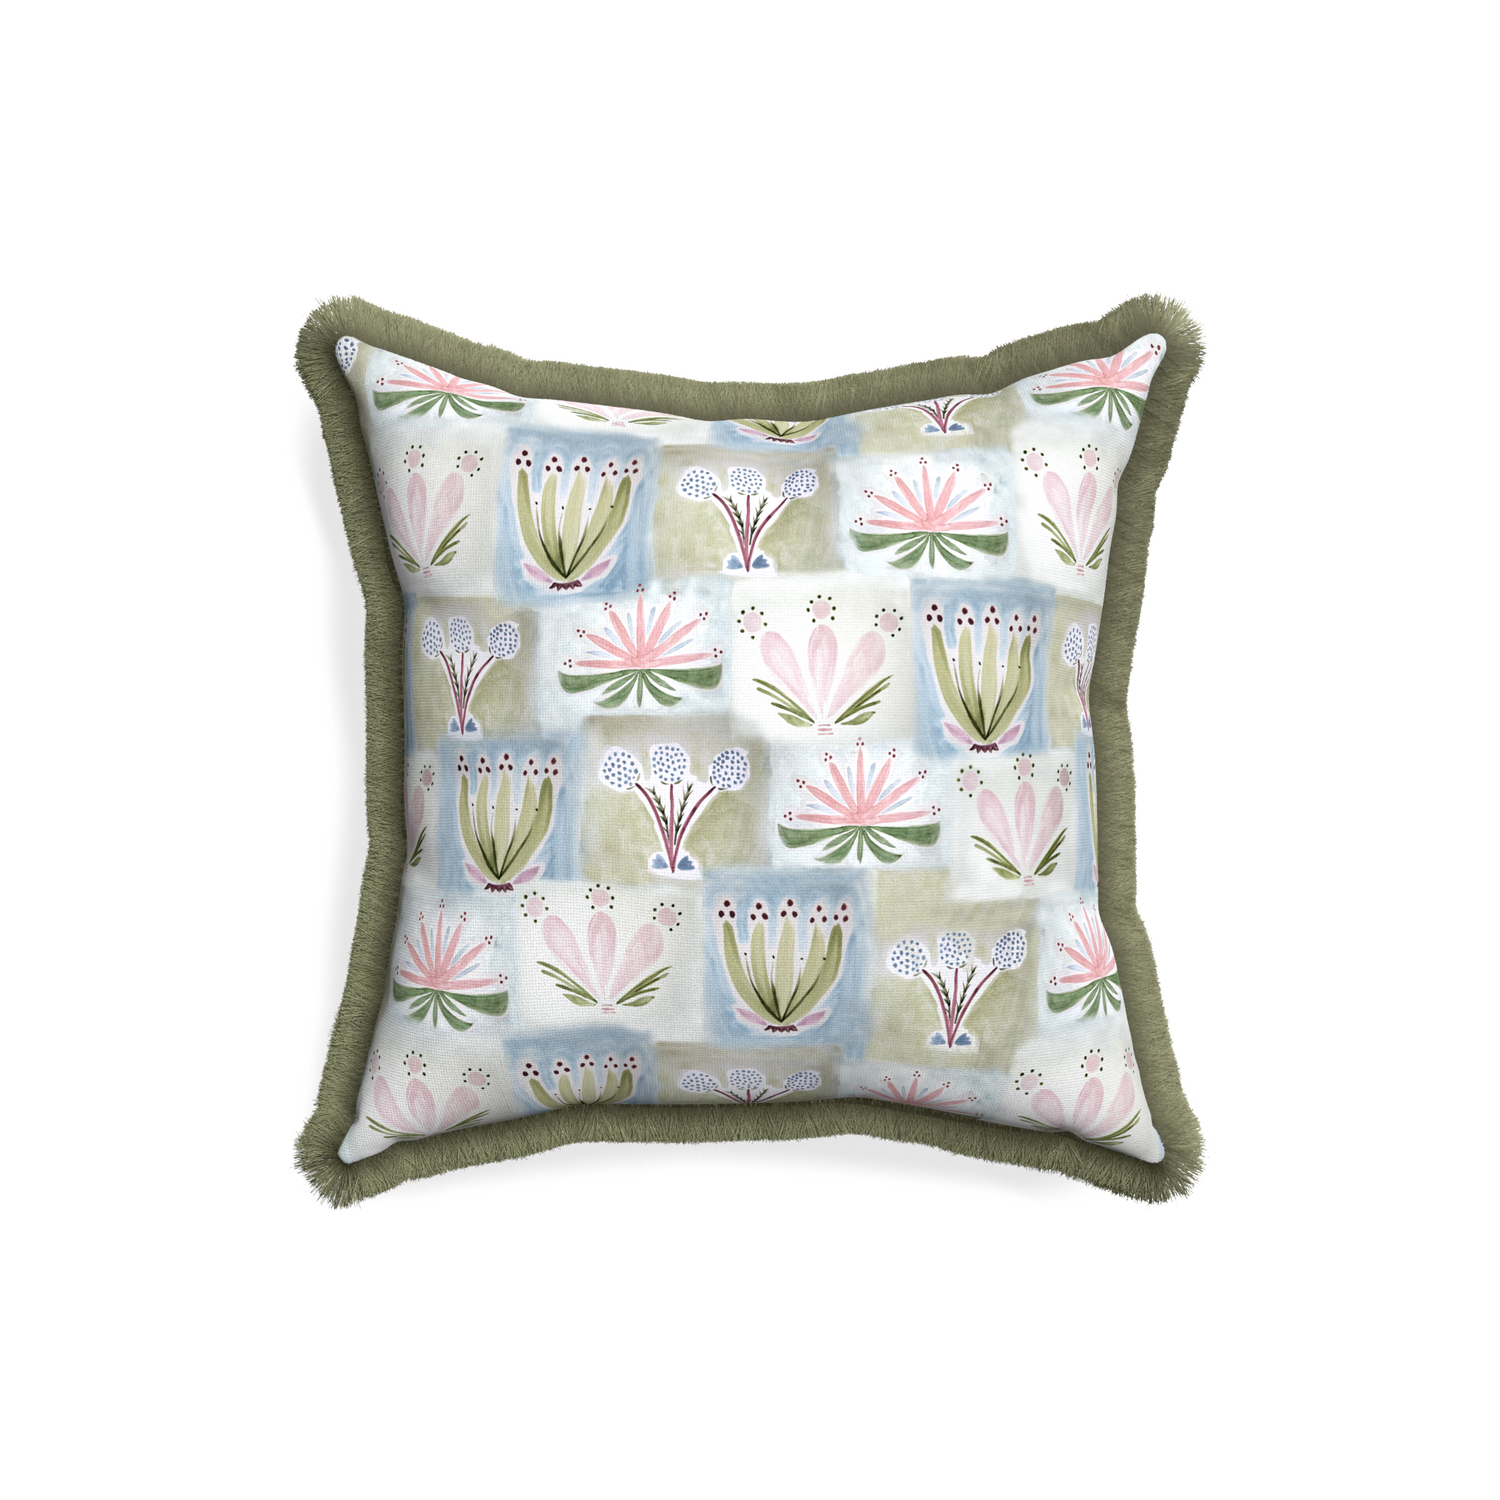 18-square harper custom hand-painted floralpillow with sage fringe on white background